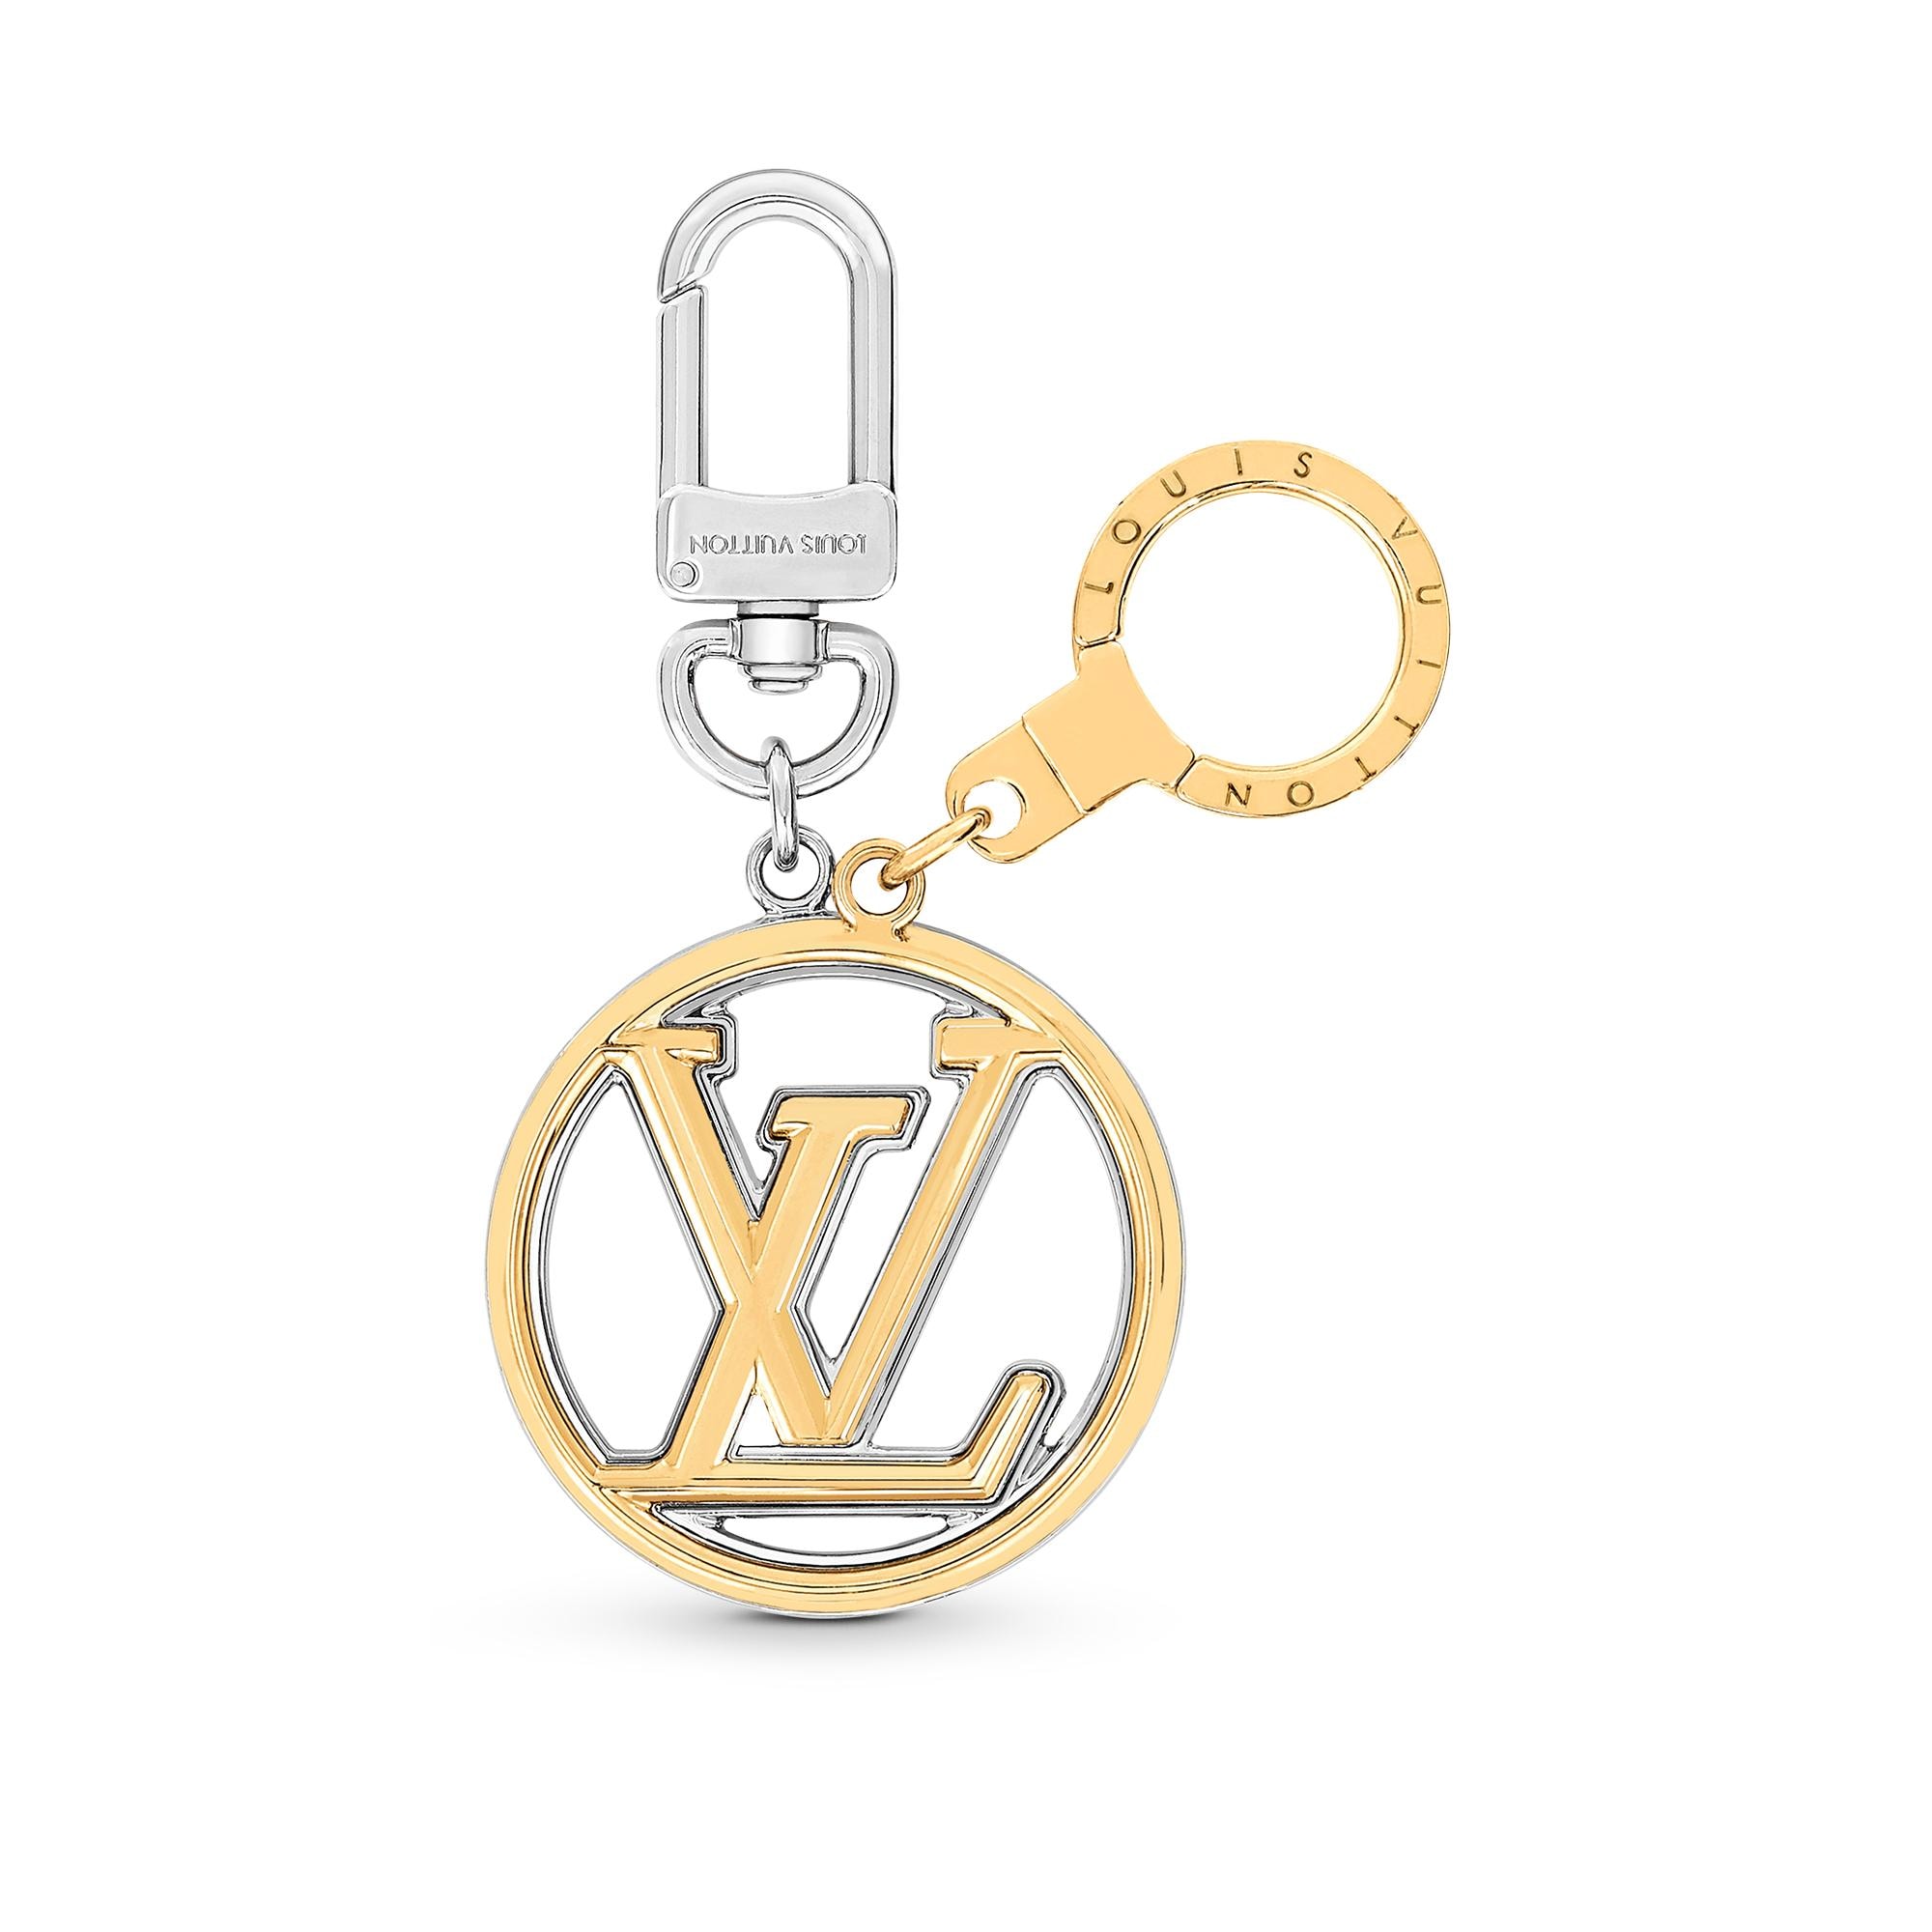 Louis Vuitton LV Circle Bestfriend Bag Charm and Key Holder in Gold – Accessories M80246